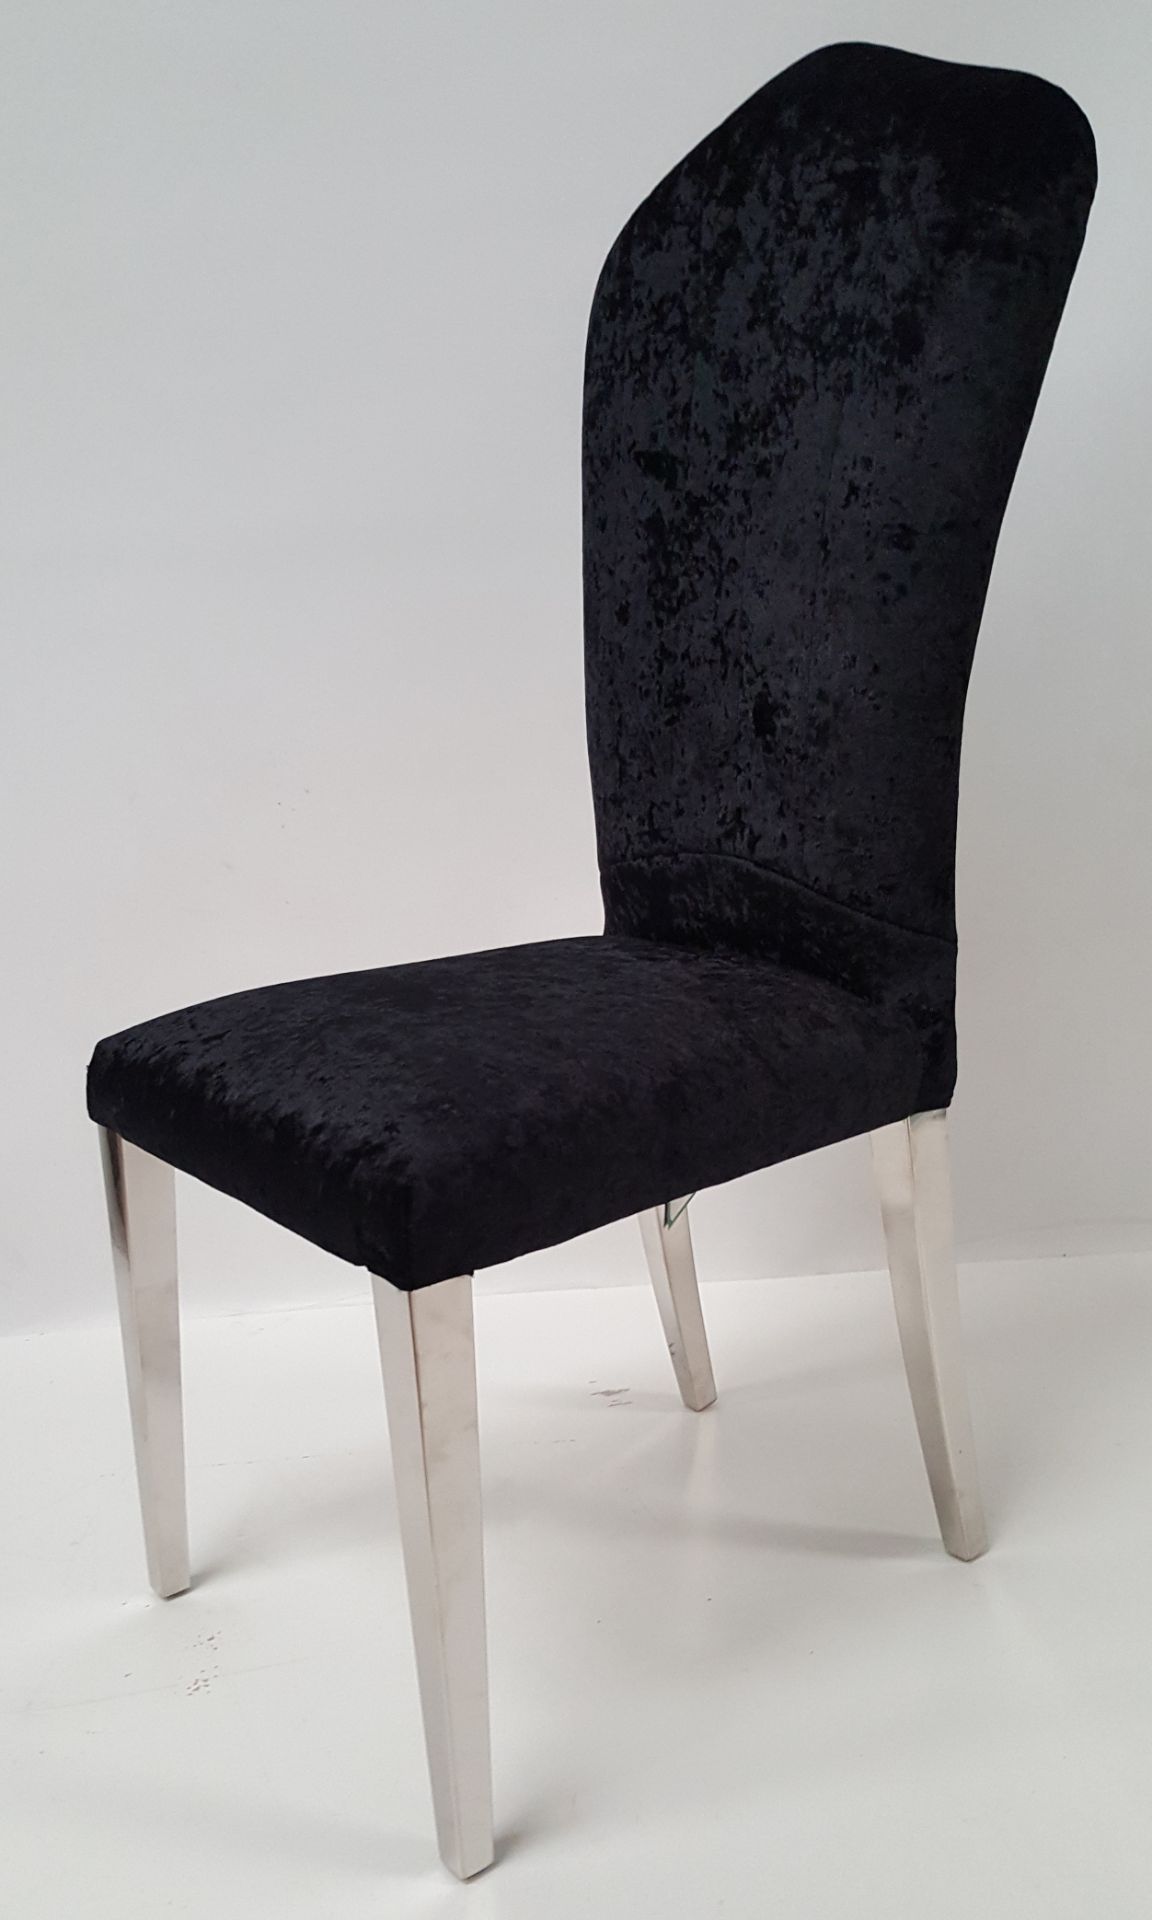 6 x STYLISH BLACK CRUSHED VELVET DINING TABLE CHAIRS - CL408 - Location: Altrincham WA14 - Image 6 of 6